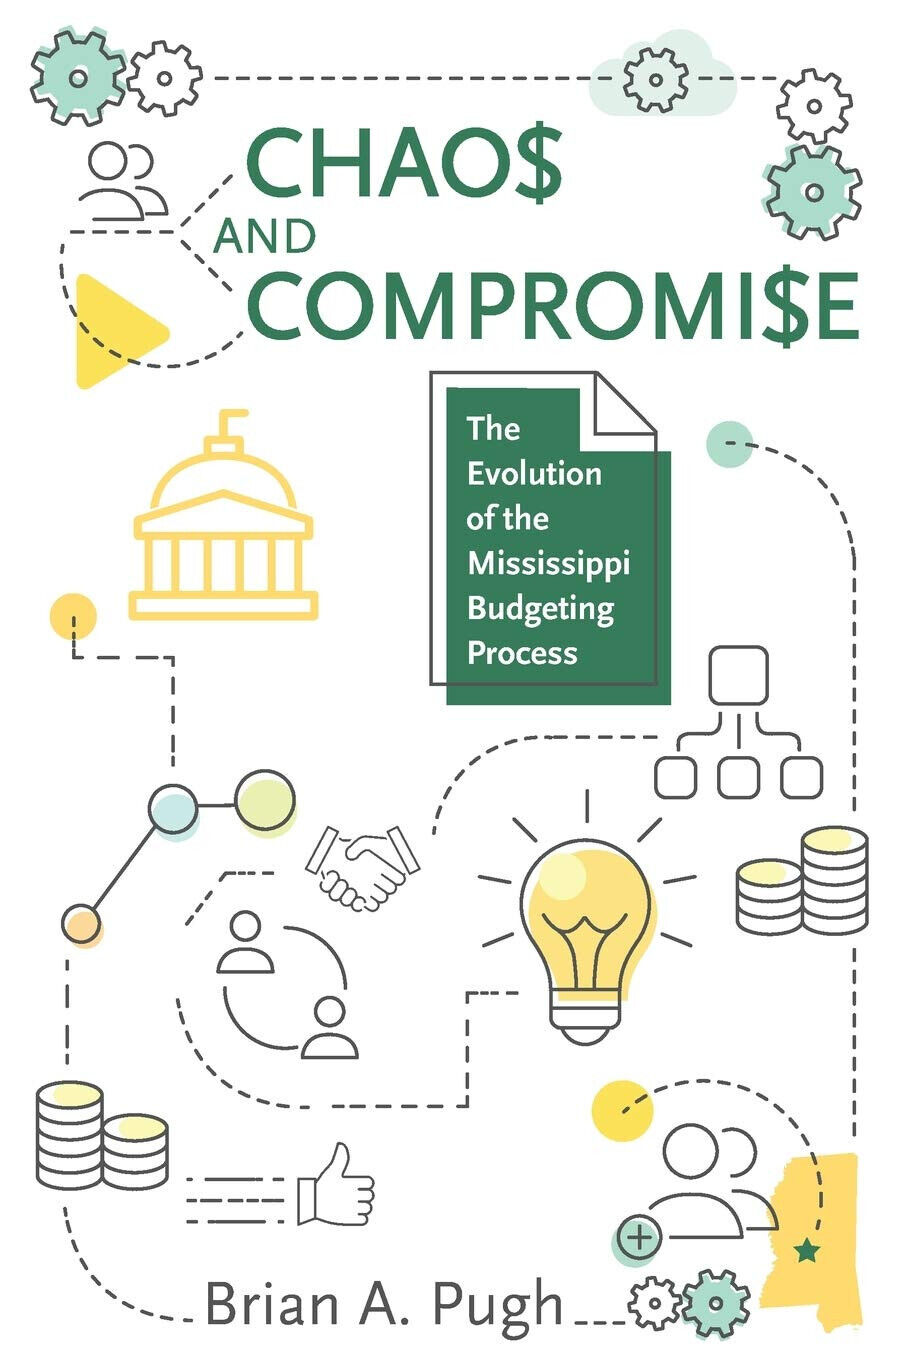 Chaos And Compromise - Brian A. Pugh - University Press Of Mississippi, 2020